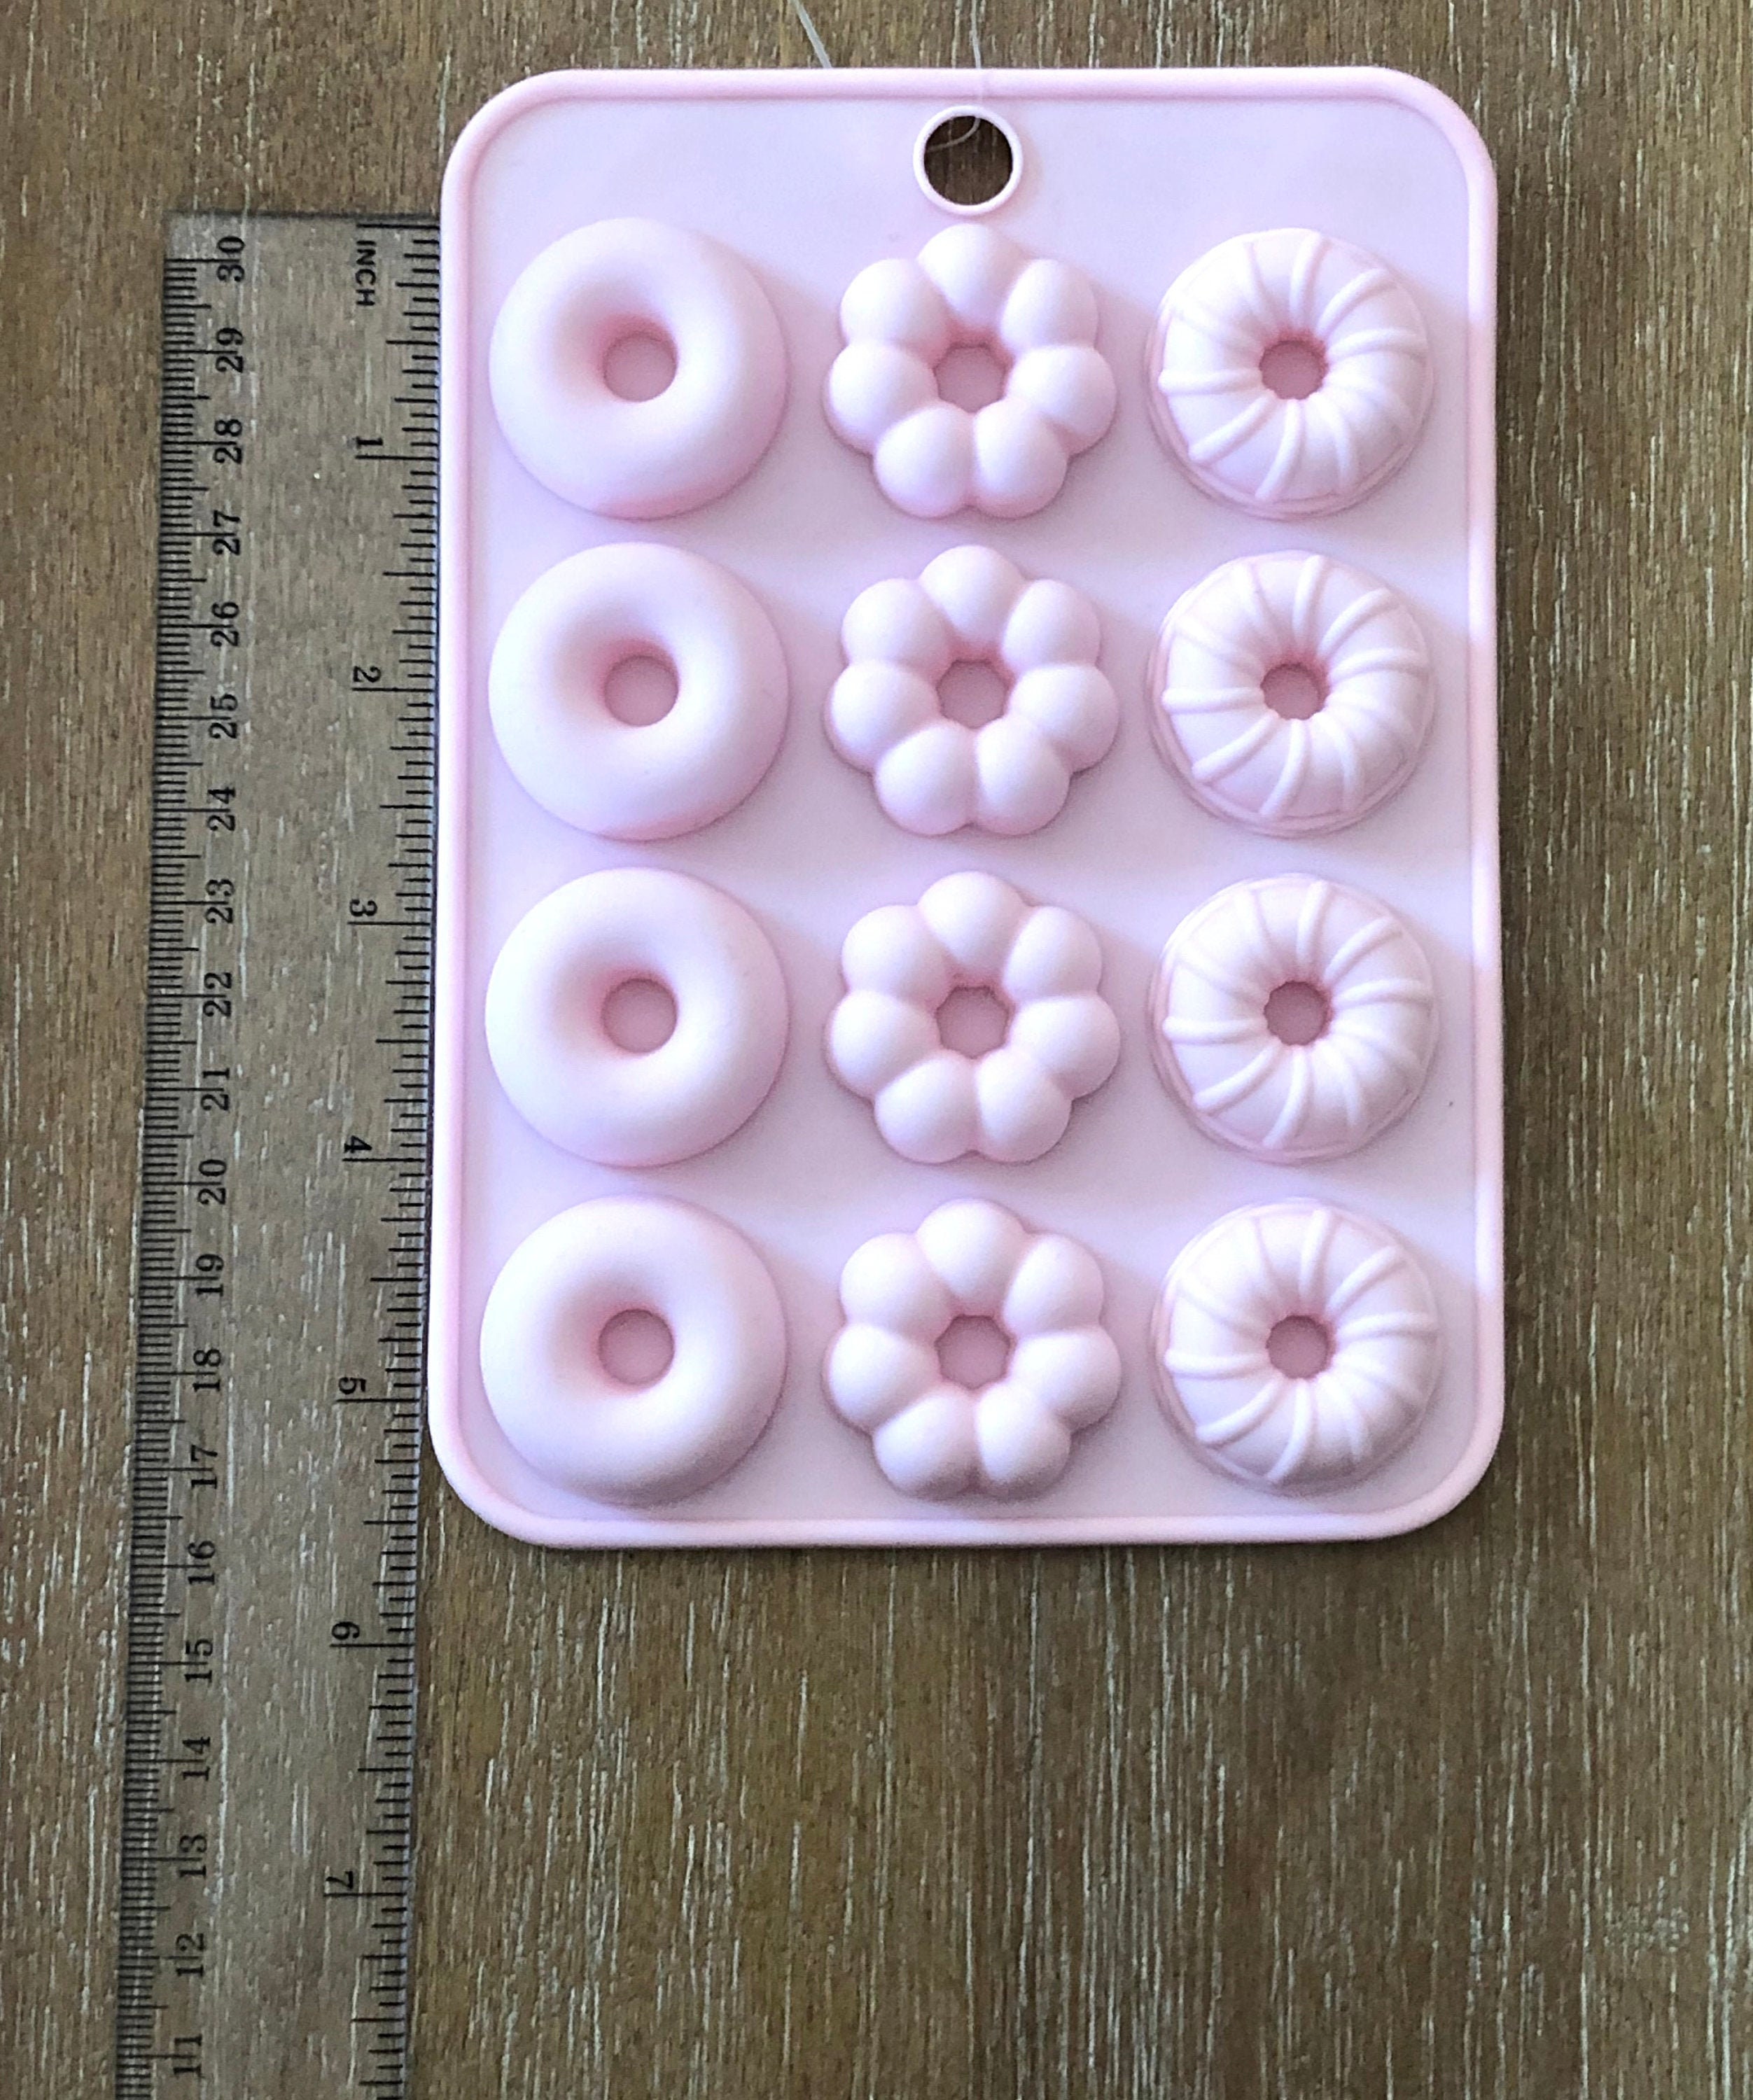 Daiso Japan, Lot of 3 Different Soft Silicone Mold for Resin or